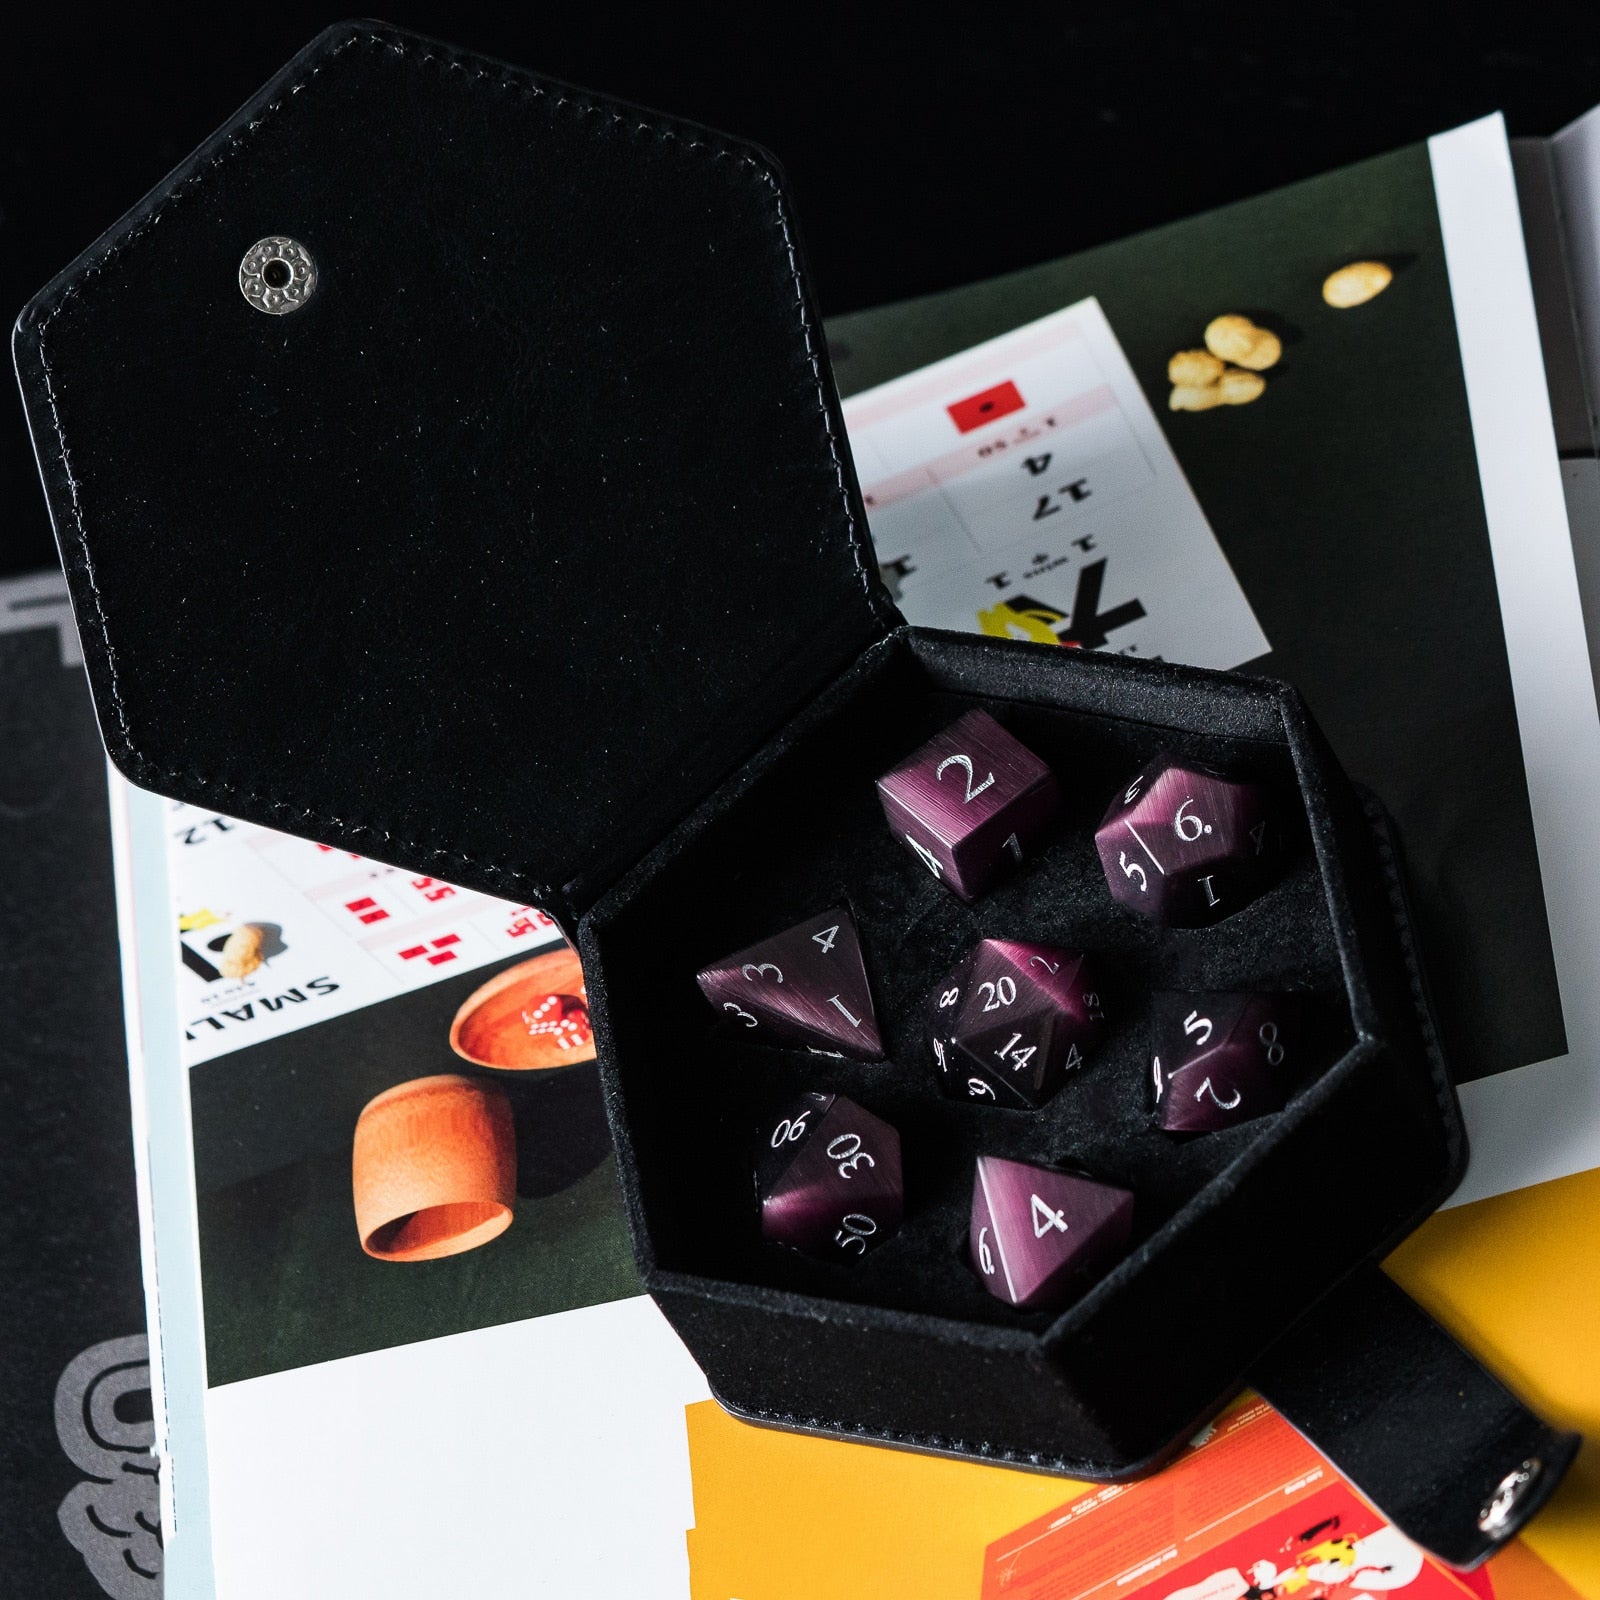 Stone dice set in complementary black case